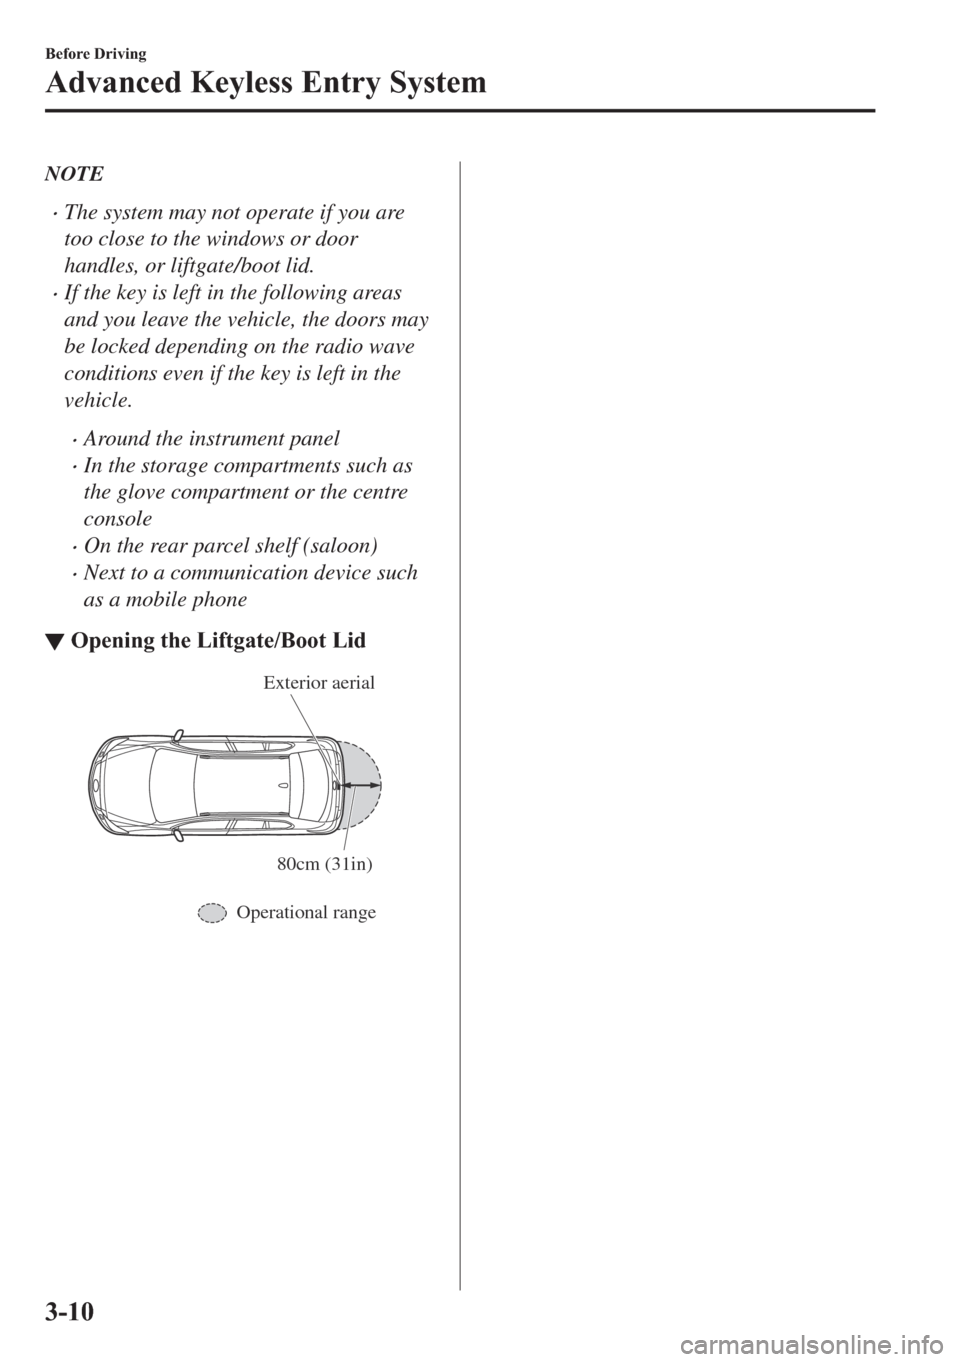 MAZDA MODEL 6 2018  Owners Manual (in English) NOTE
�xThe system may not operate if you are
too close to the windows or door
handles, or liftgate/boot lid.
�xIf the key is left in the following areas
and you leave the vehicle, the doors may
be loc